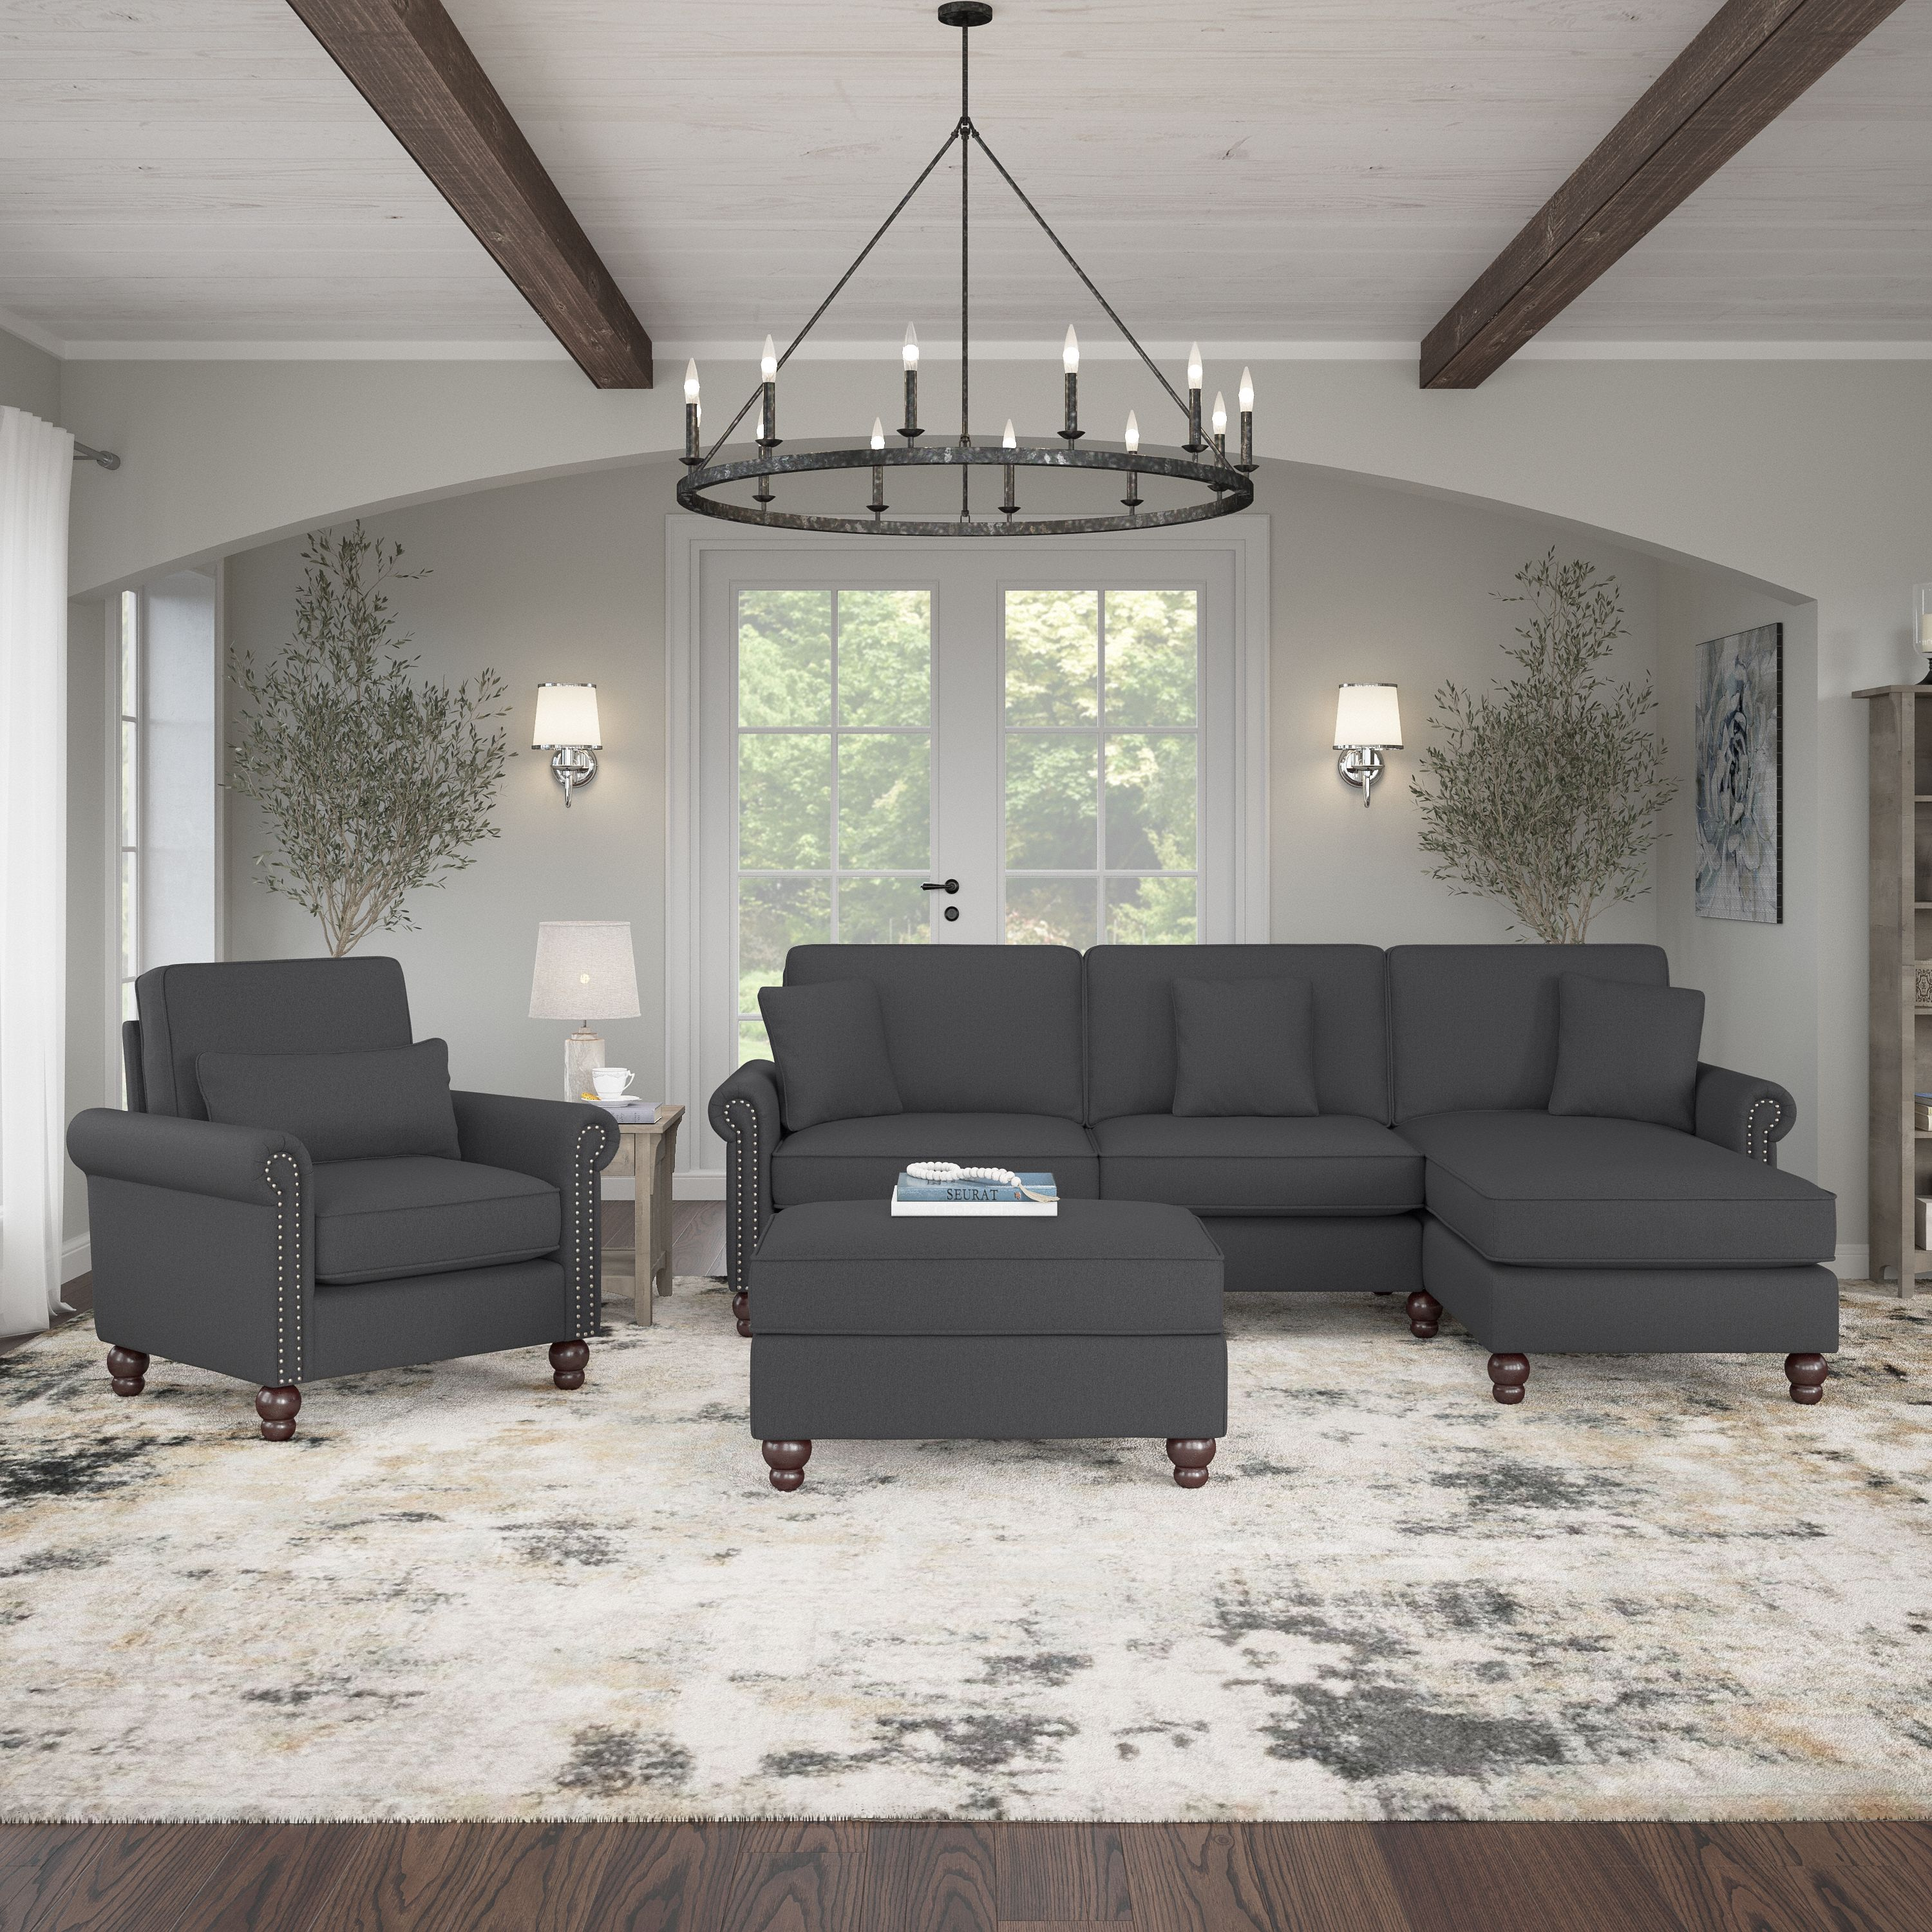 Shop Bush Furniture Coventry 102W Sectional Couch with Reversible Chaise Lounge, Accent Chair, and Ottoman 01 CVN021CGH #color_charcoal gray herringbone fabr